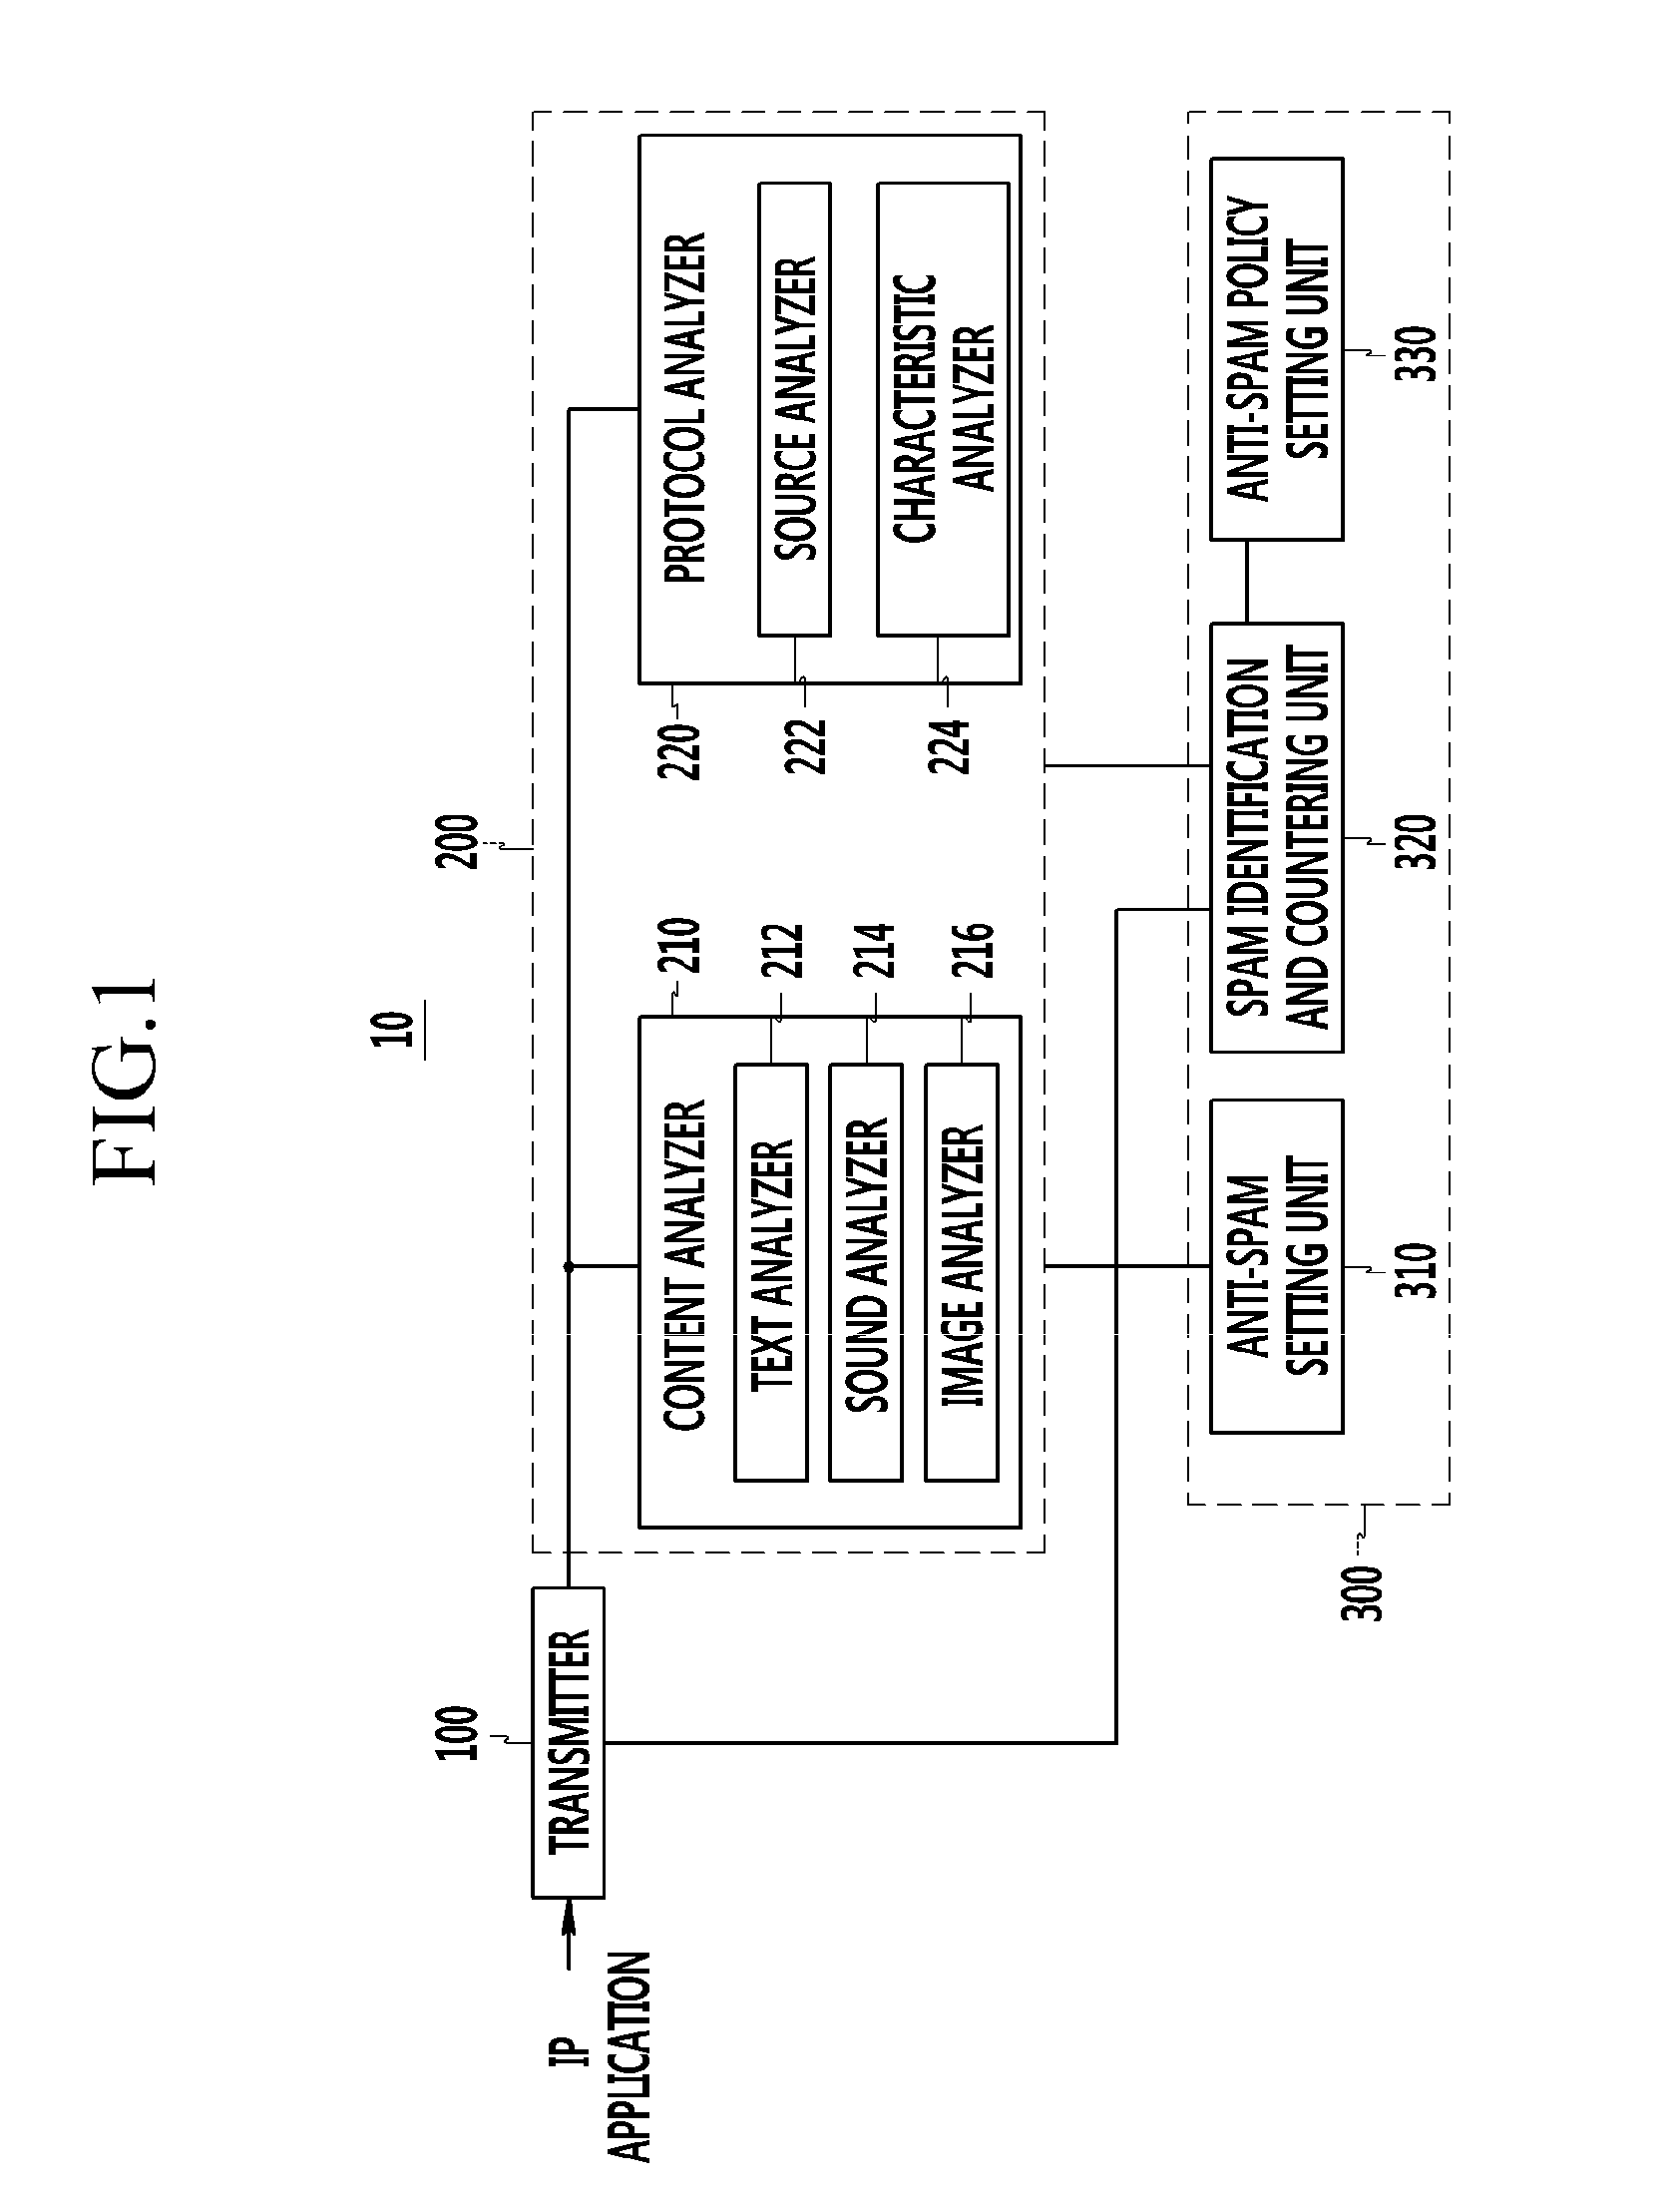 Spam countering method and apparatus